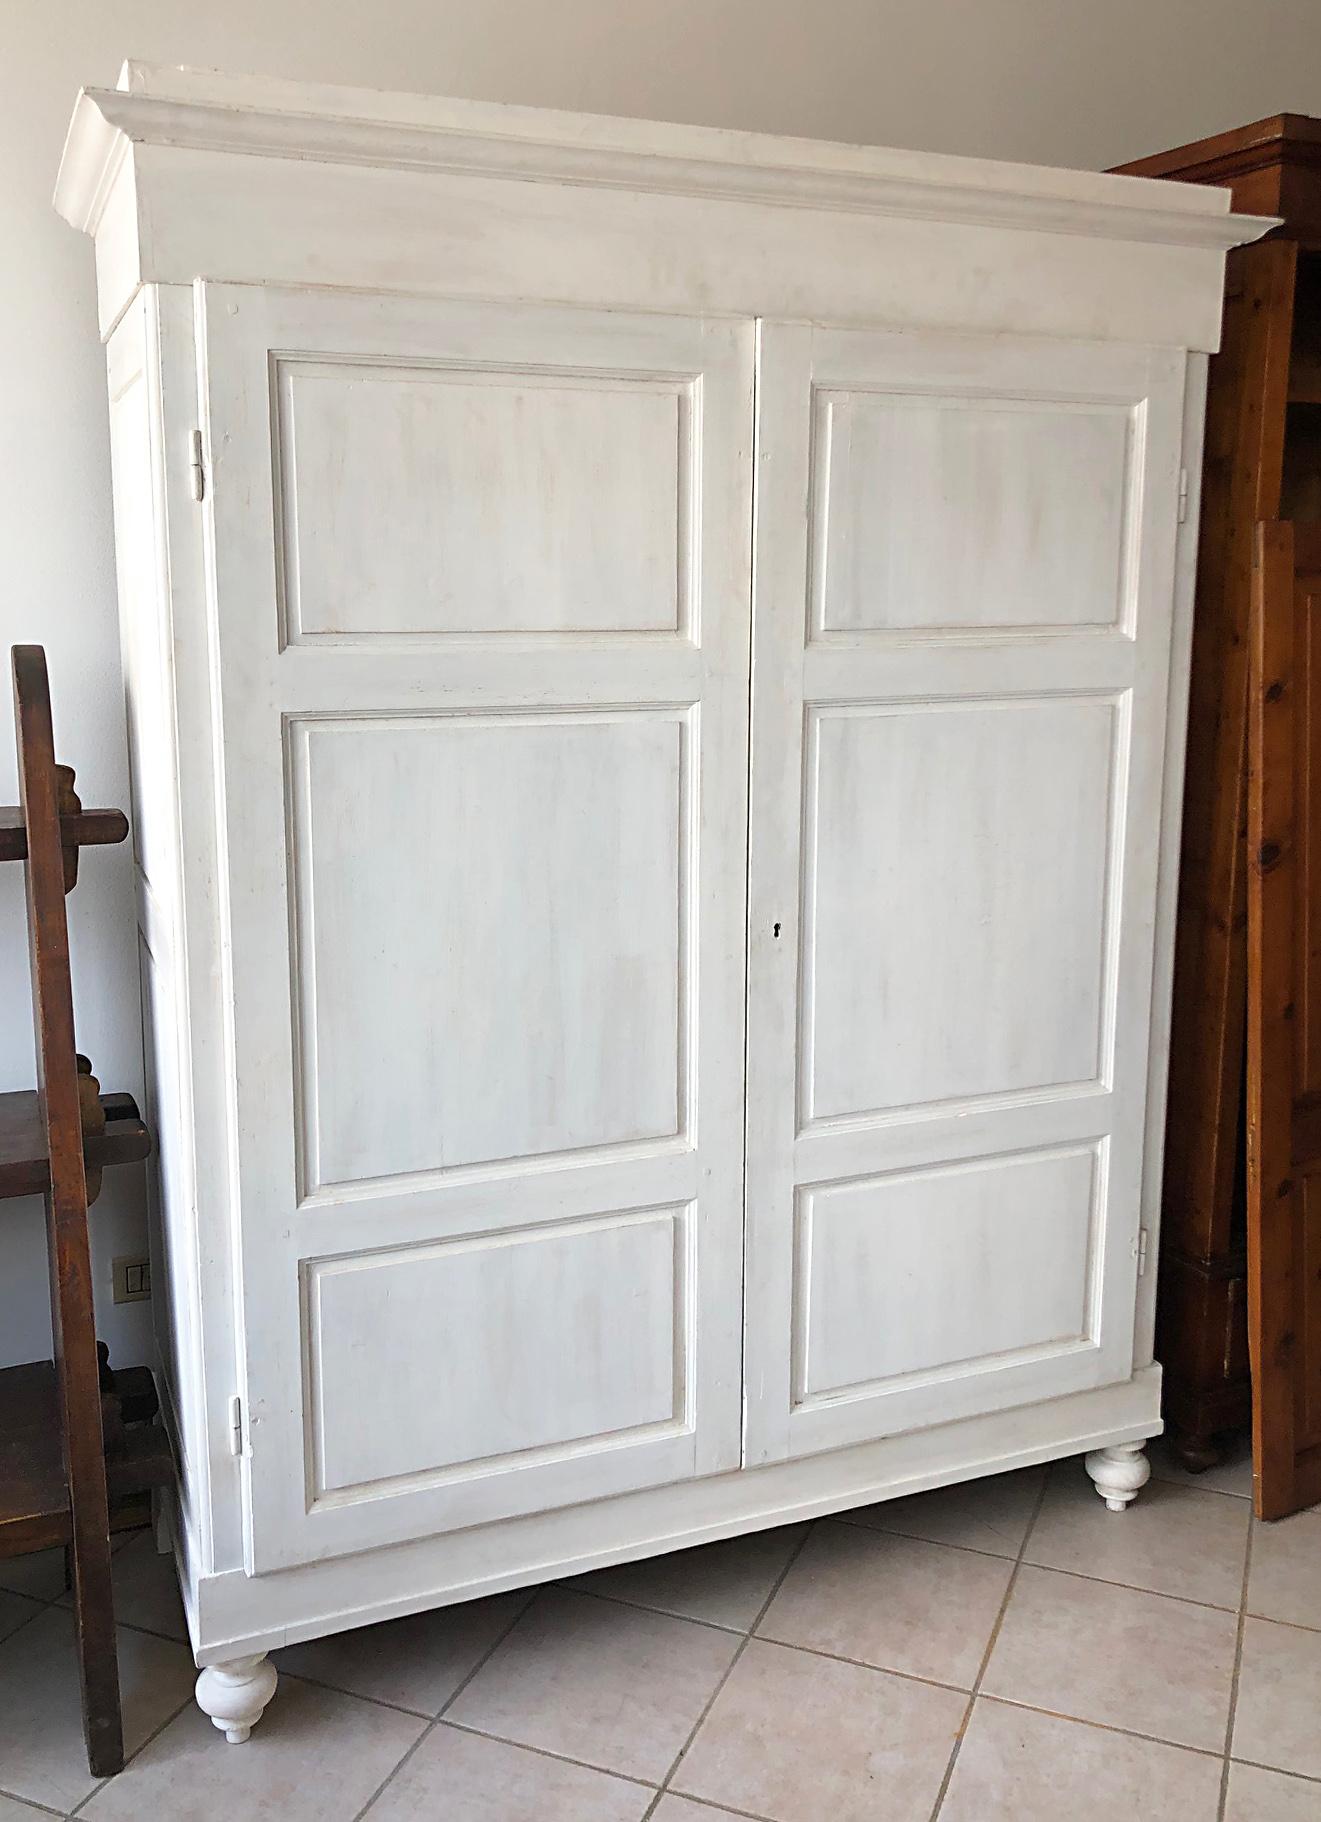 Shabby white wardrobe, original Italian from 1880, with two internal drawers and clothes rail.
The cabinet is completely removable.
They will be delivered disassembled in a specific wooden case for export, packed in bubble wrap.
Comes from an old